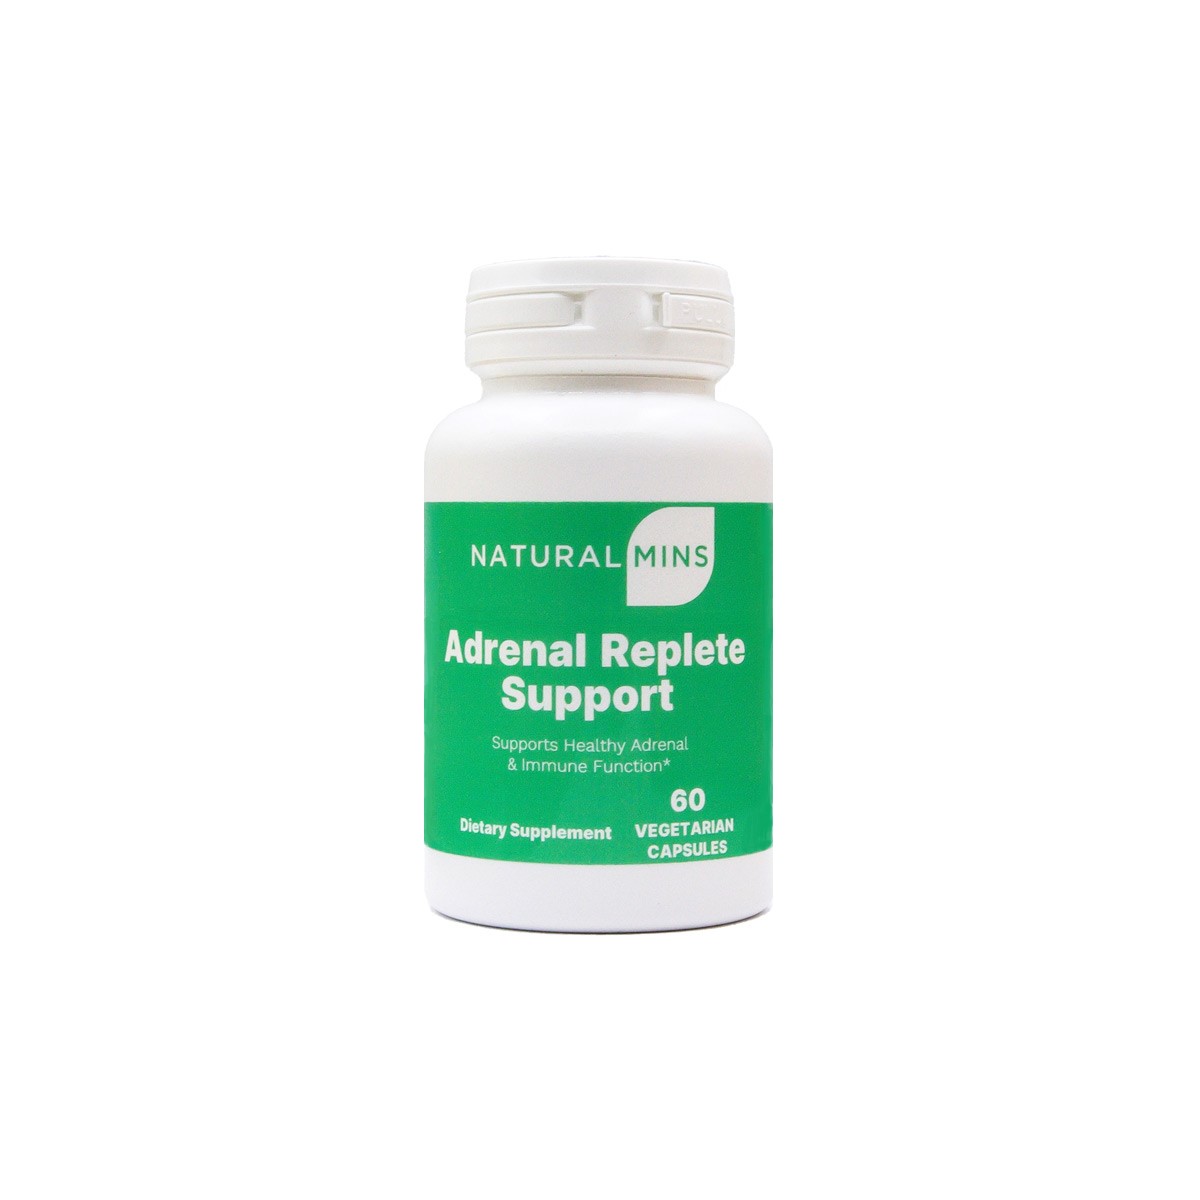 Adrenal Replete Support